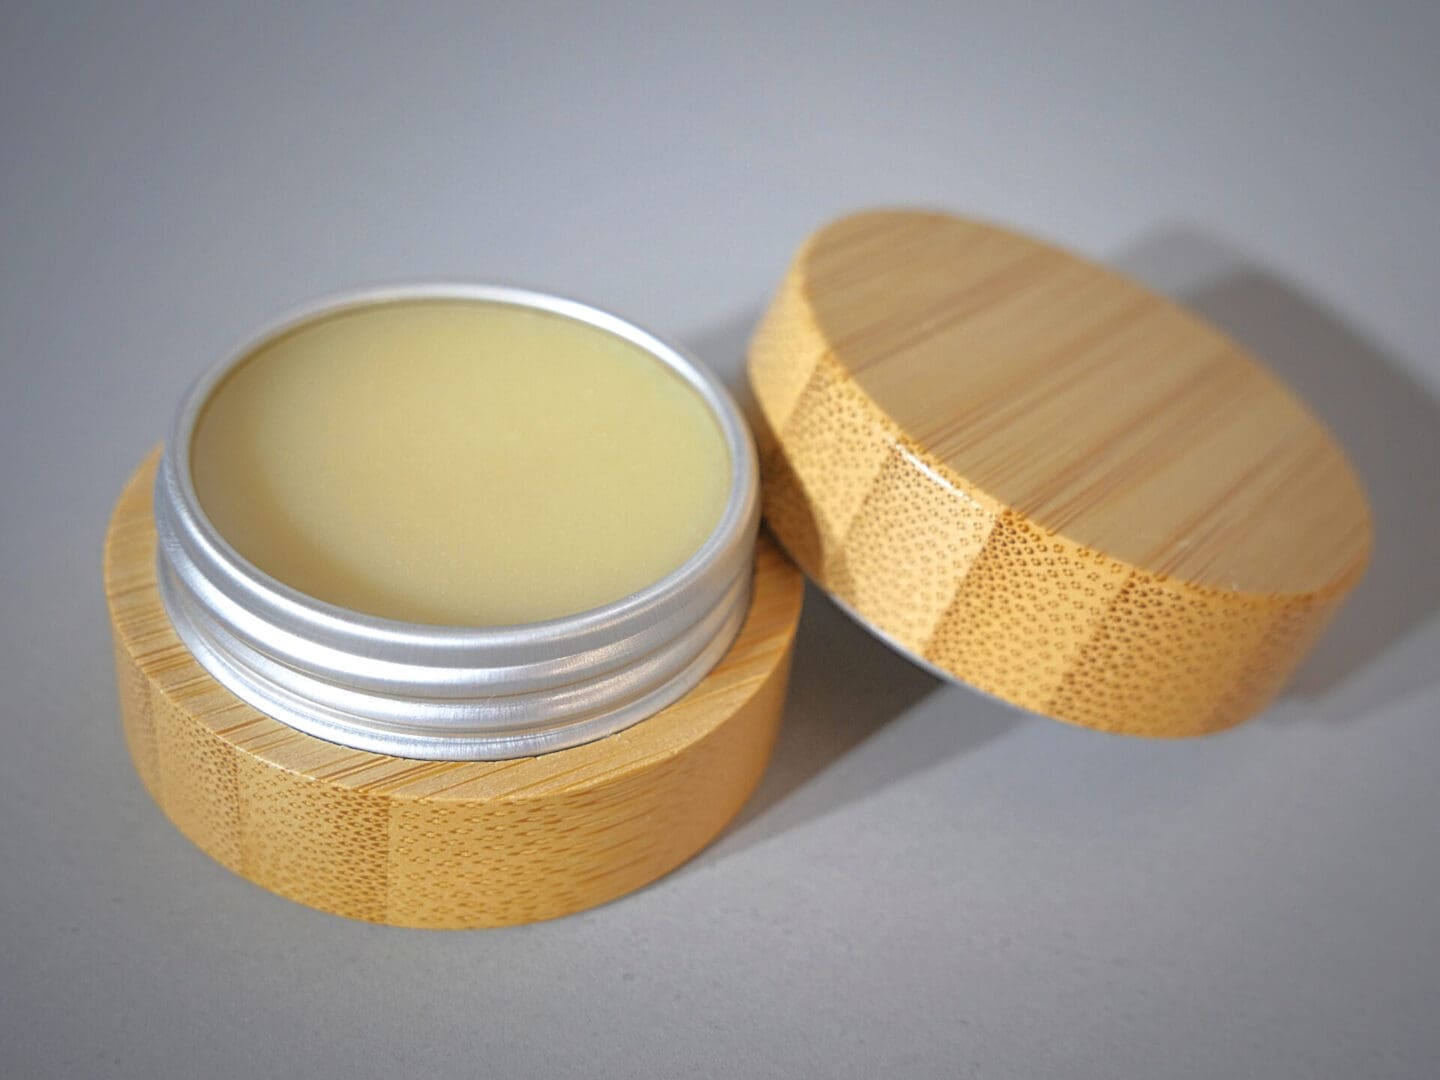 A wooden container with the Hydrate & Restore Lip Balm in it.